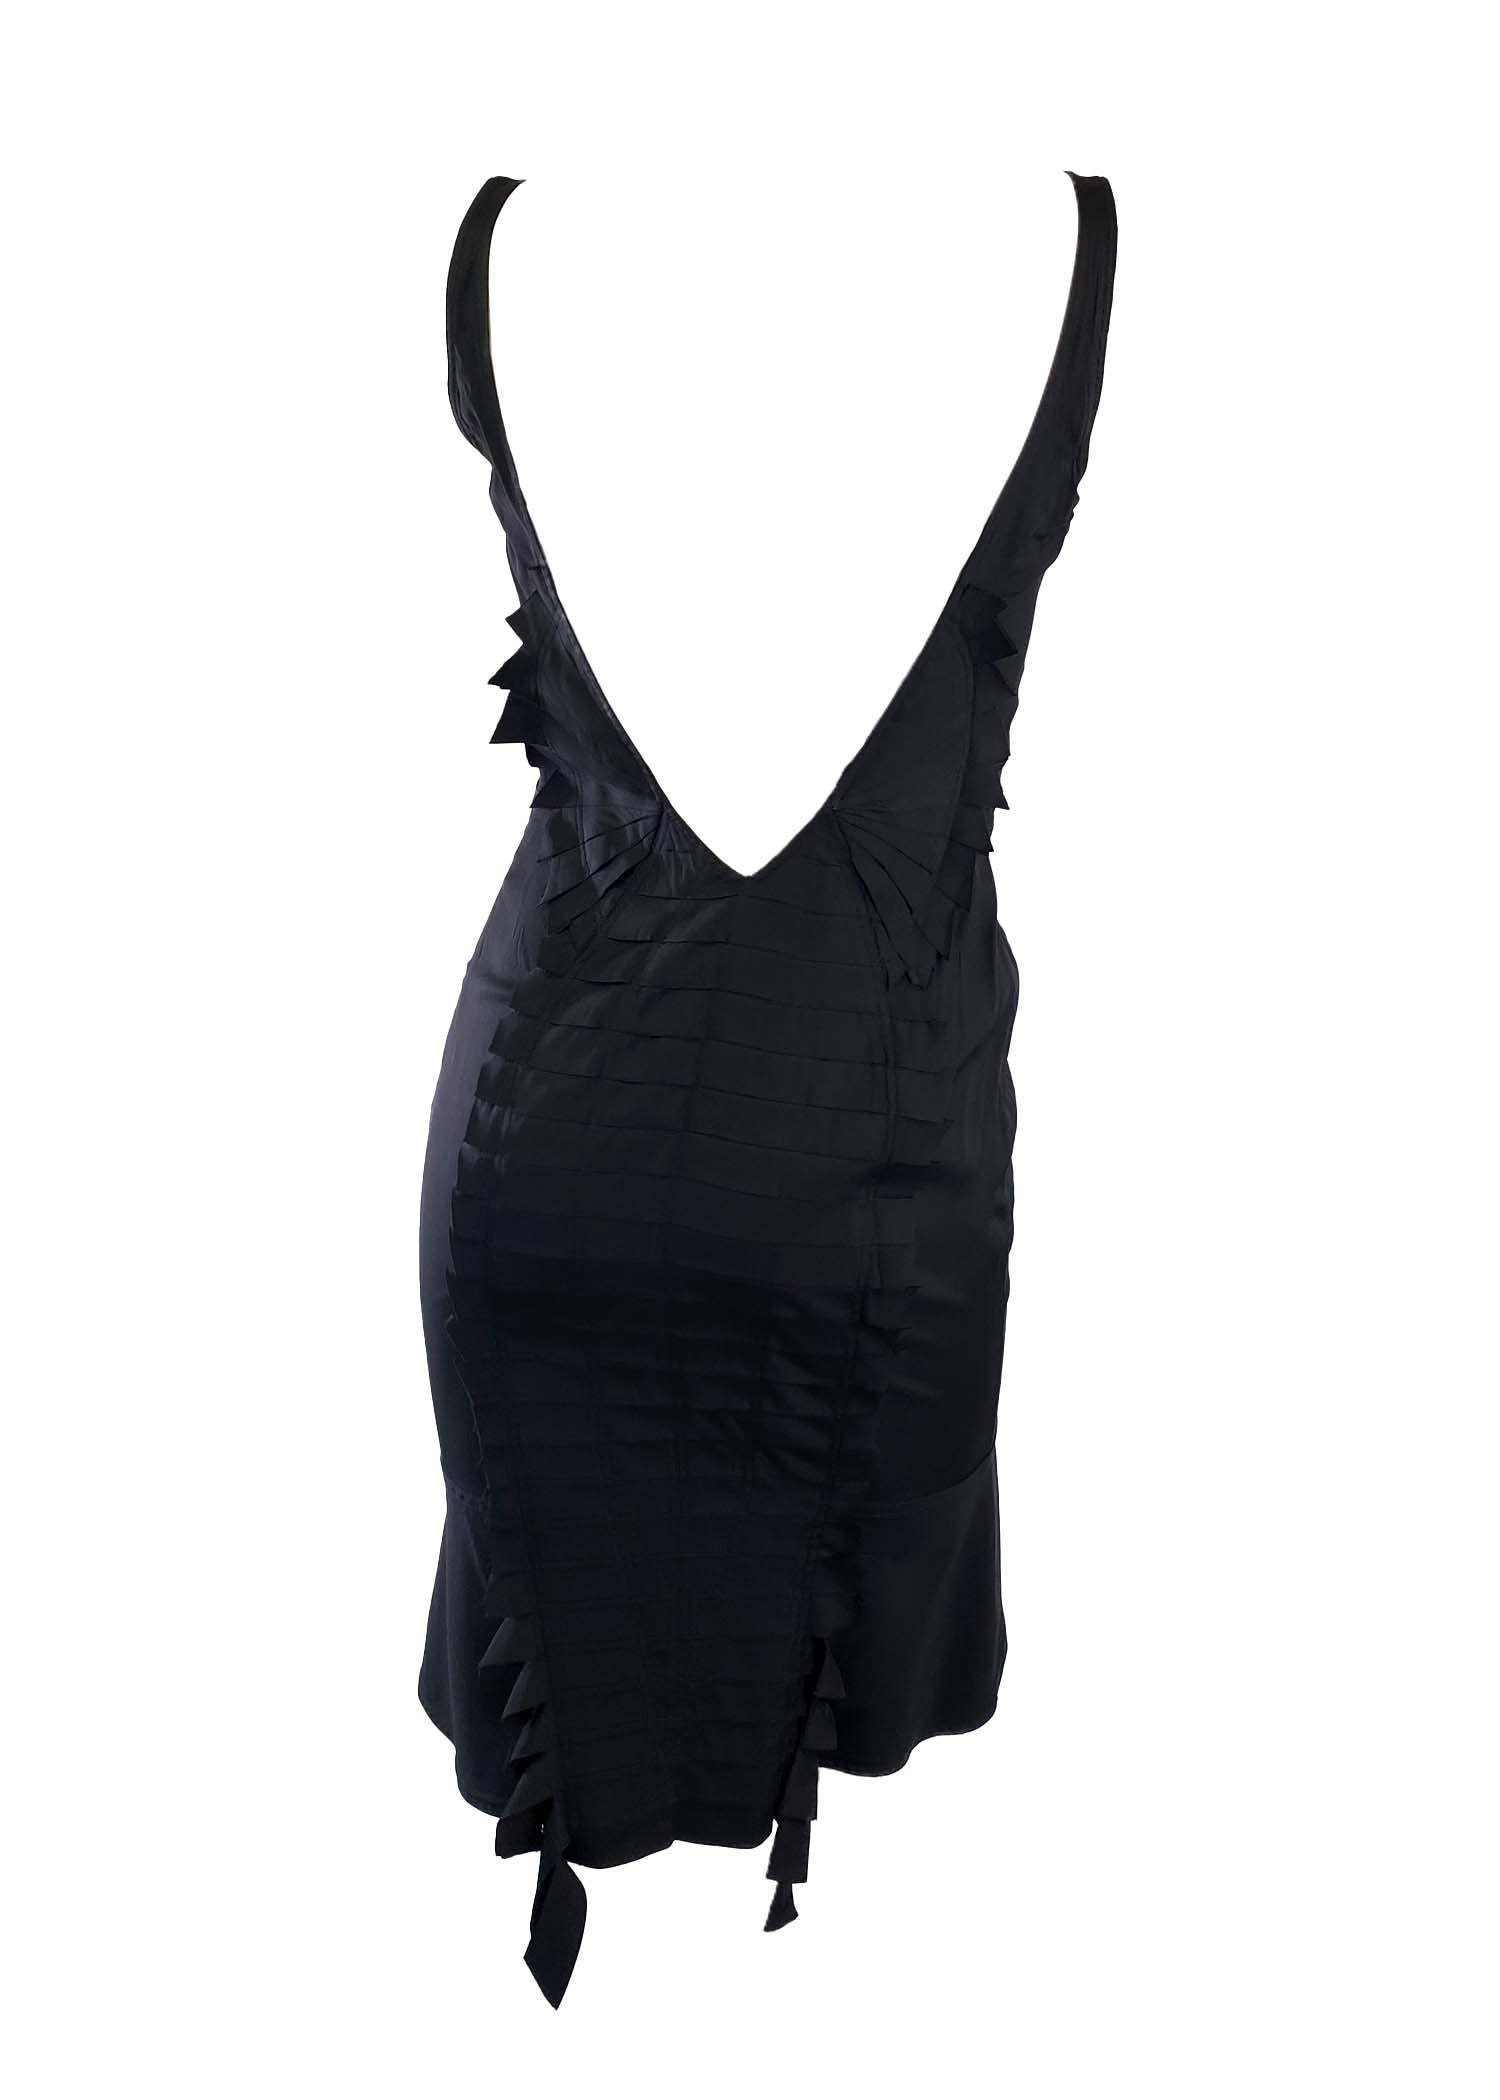 S/S 2004 Gucci by Tom Ford Black Ribbon Appliqué Sleeveless Stretch Silk Dress In Good Condition For Sale In West Hollywood, CA